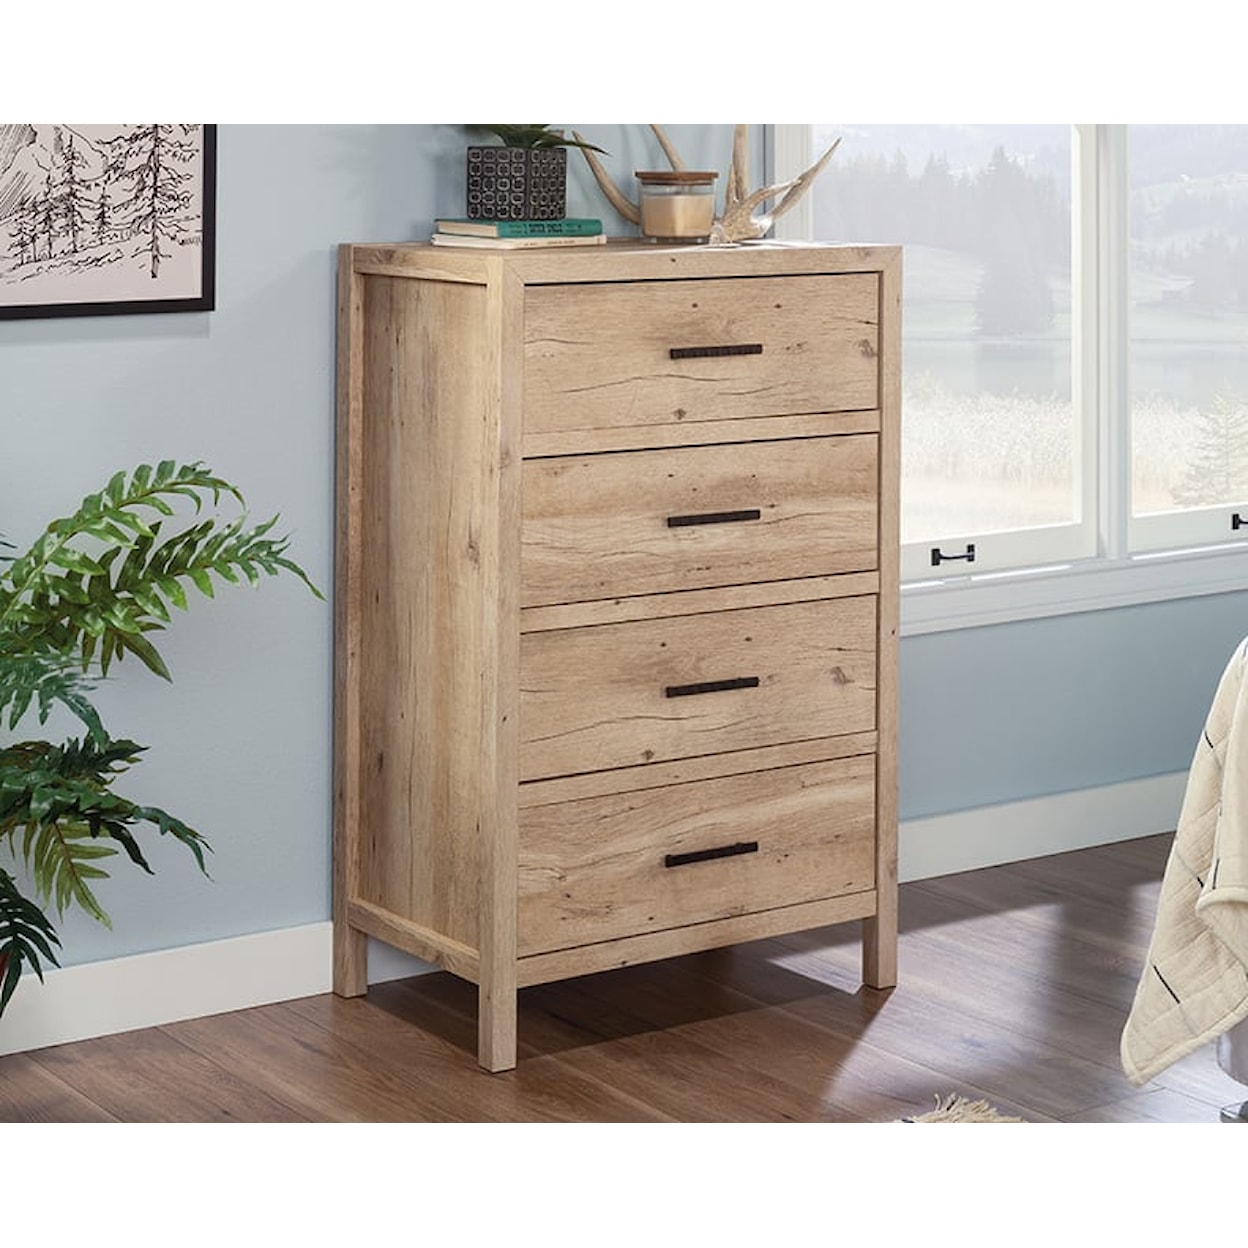 Sauder Pacific View Four-Drawer Bedroom Chest